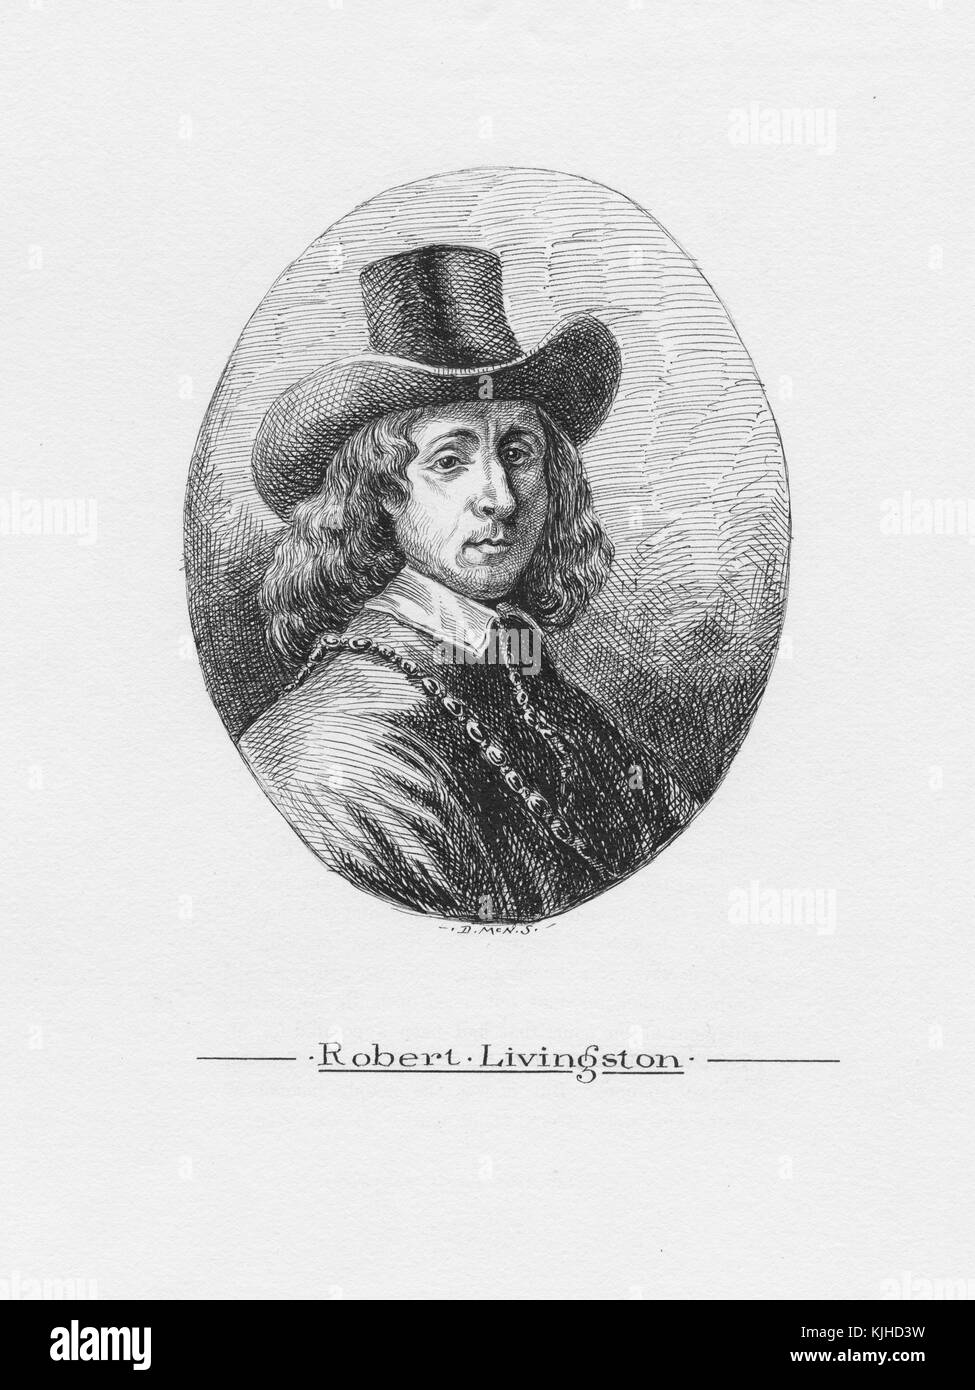 Etched portrait of Robert Livingston the Younger, appointed mayor of Albany in 1710, serving until 1719, during his tenure, Albany grew from a trading post to the area's major supply and services center, was also appointed as one of the English colony's Commissioners for Indian Affairs, New York, 1750. From the New York Public Library. Stock Photo